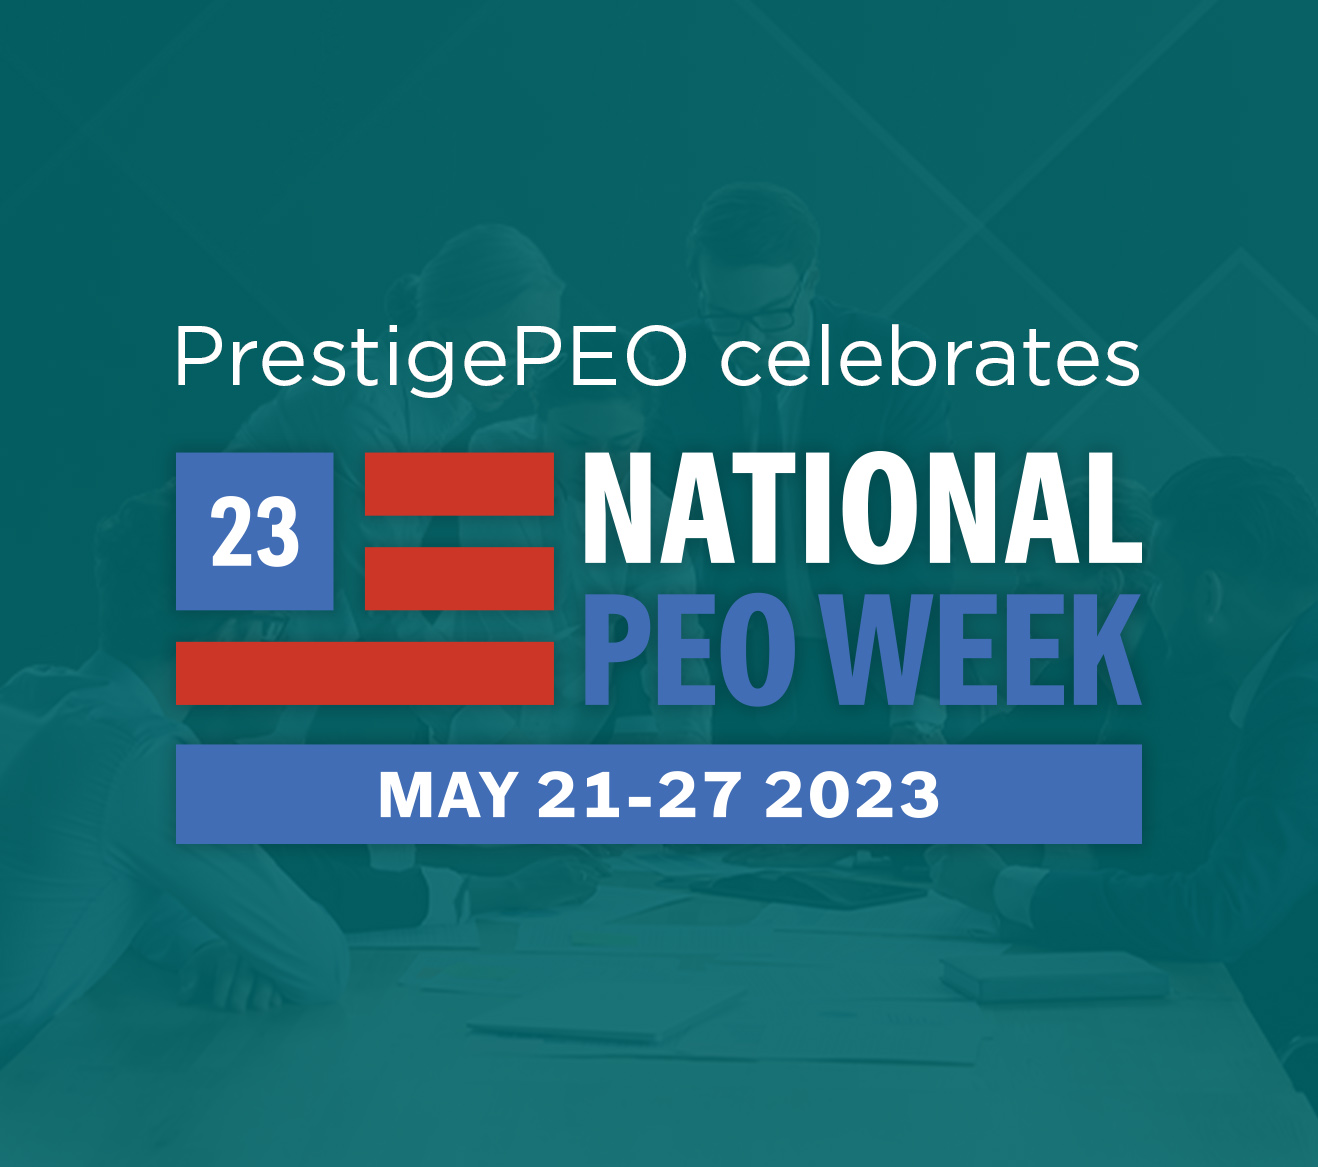 PrestigePEO to Celebrate First Annual National PEO Week May 21-27, 2023